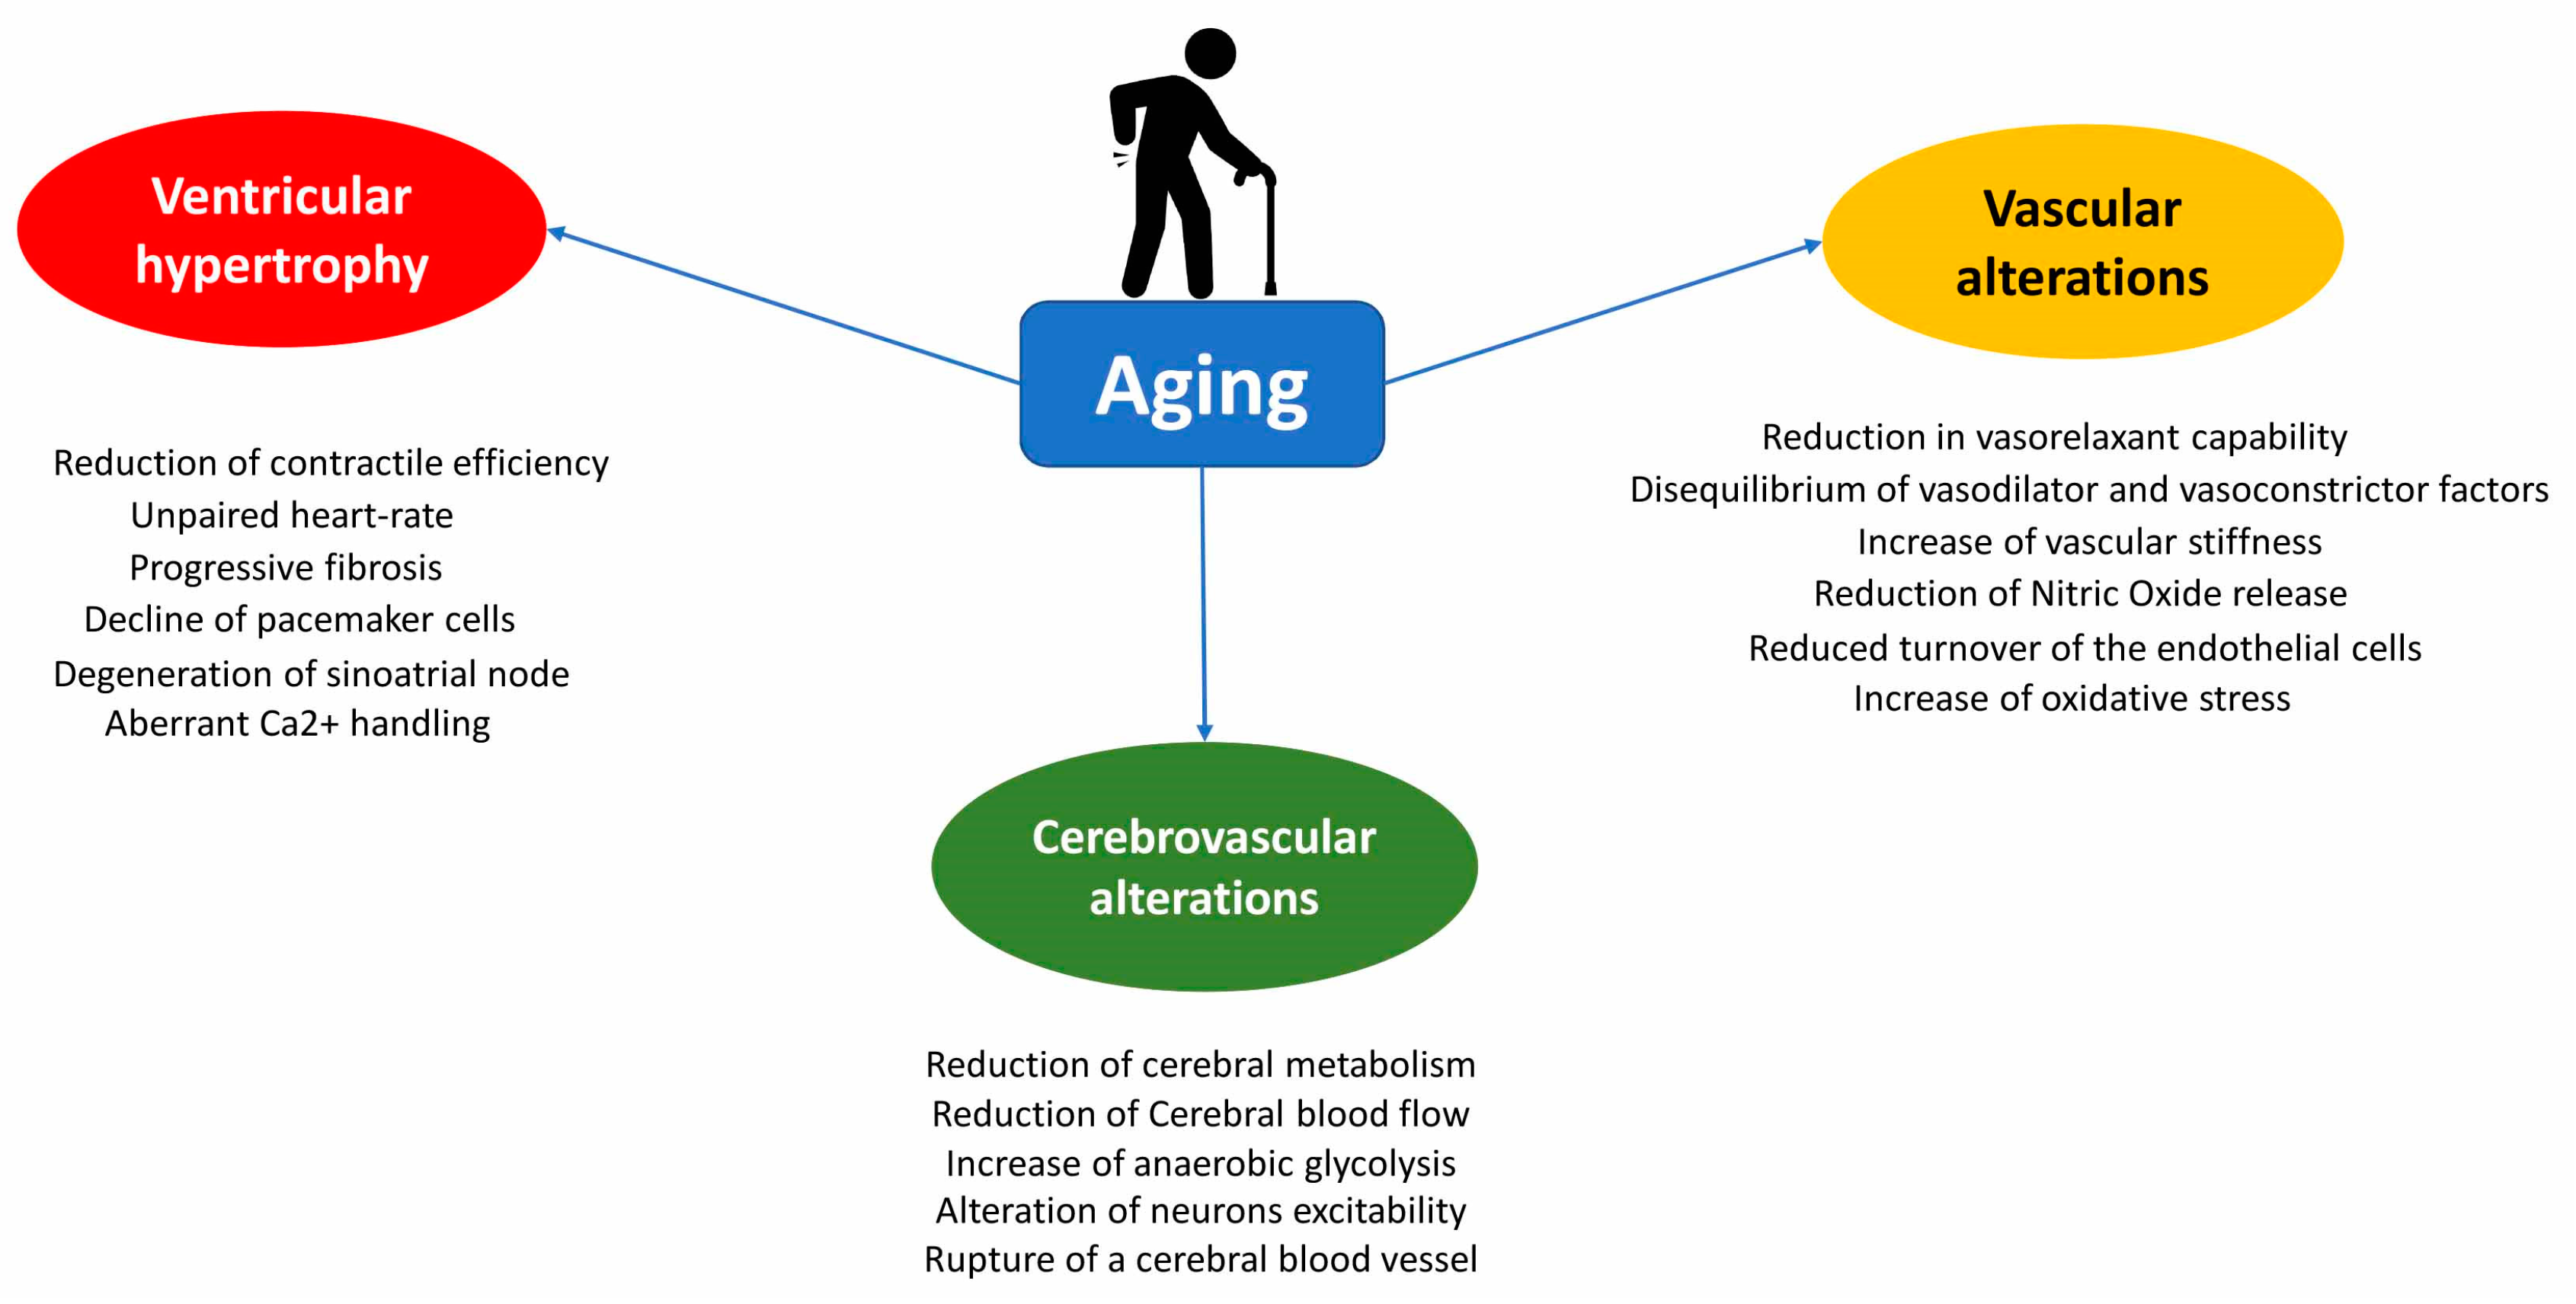 pacemaker theory of aging